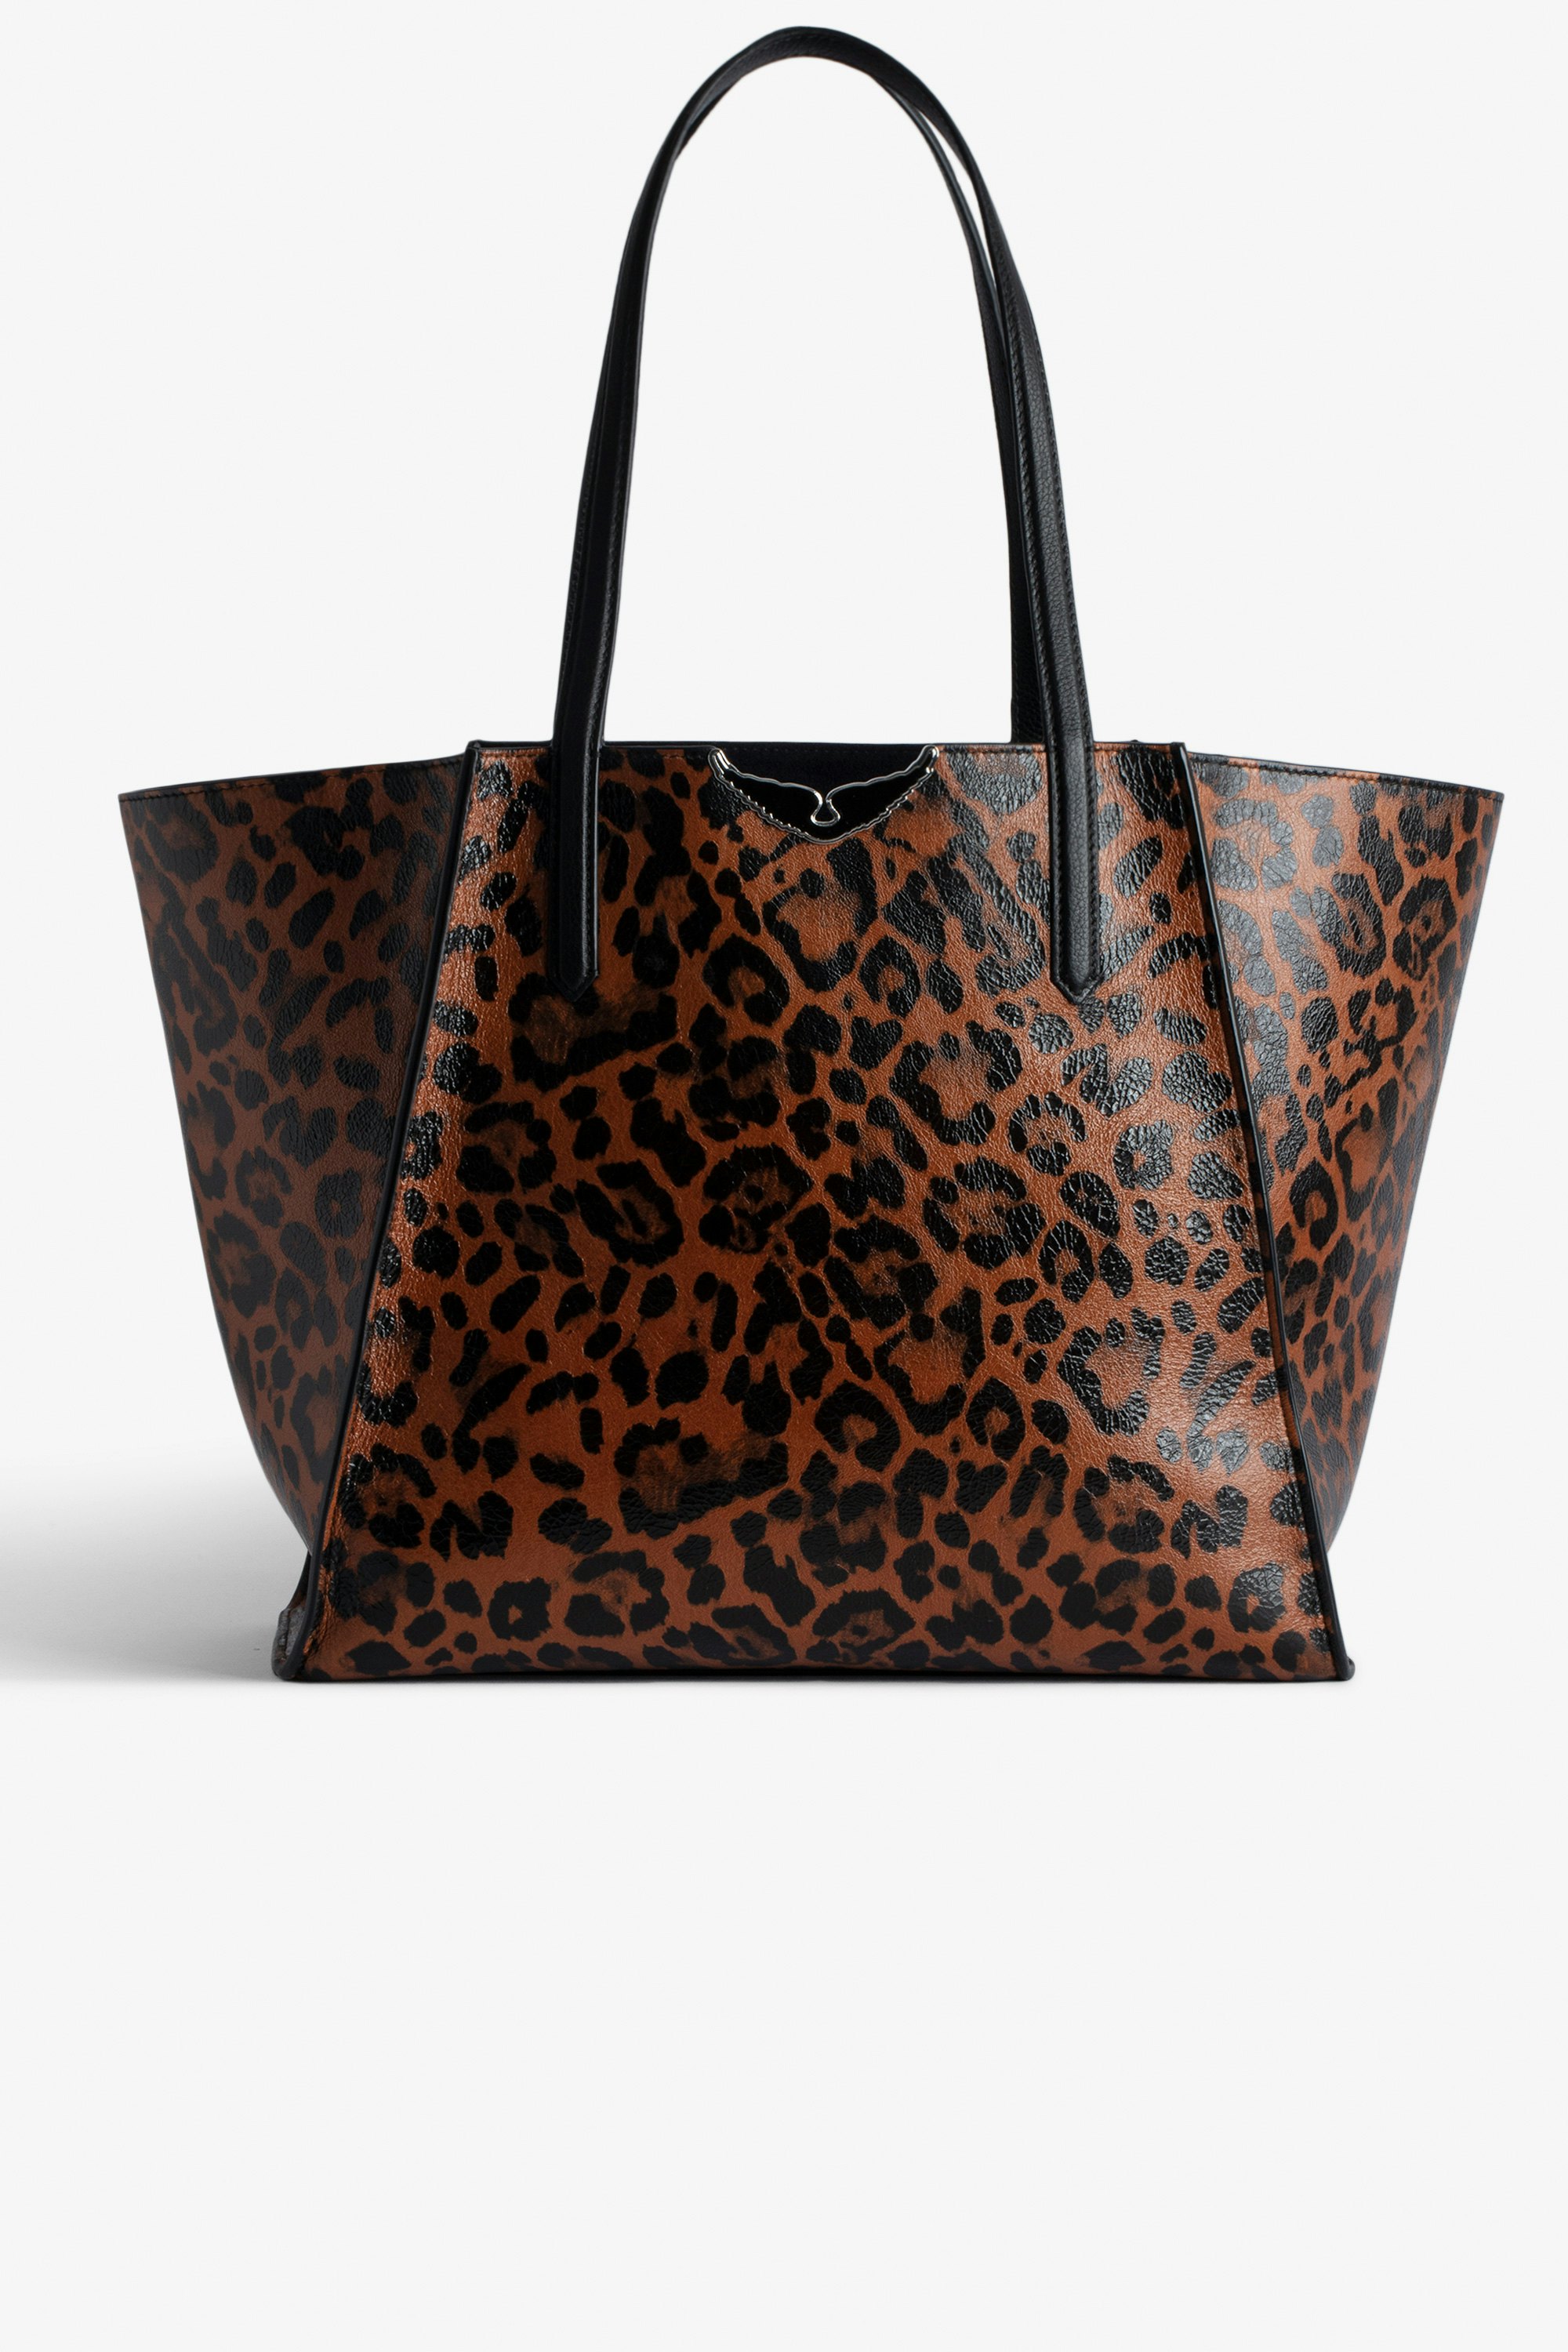 Le Borderline Leopard Bag - Women’s reversible tote bag in brown leopard-print patent leather with handle and metal wings.